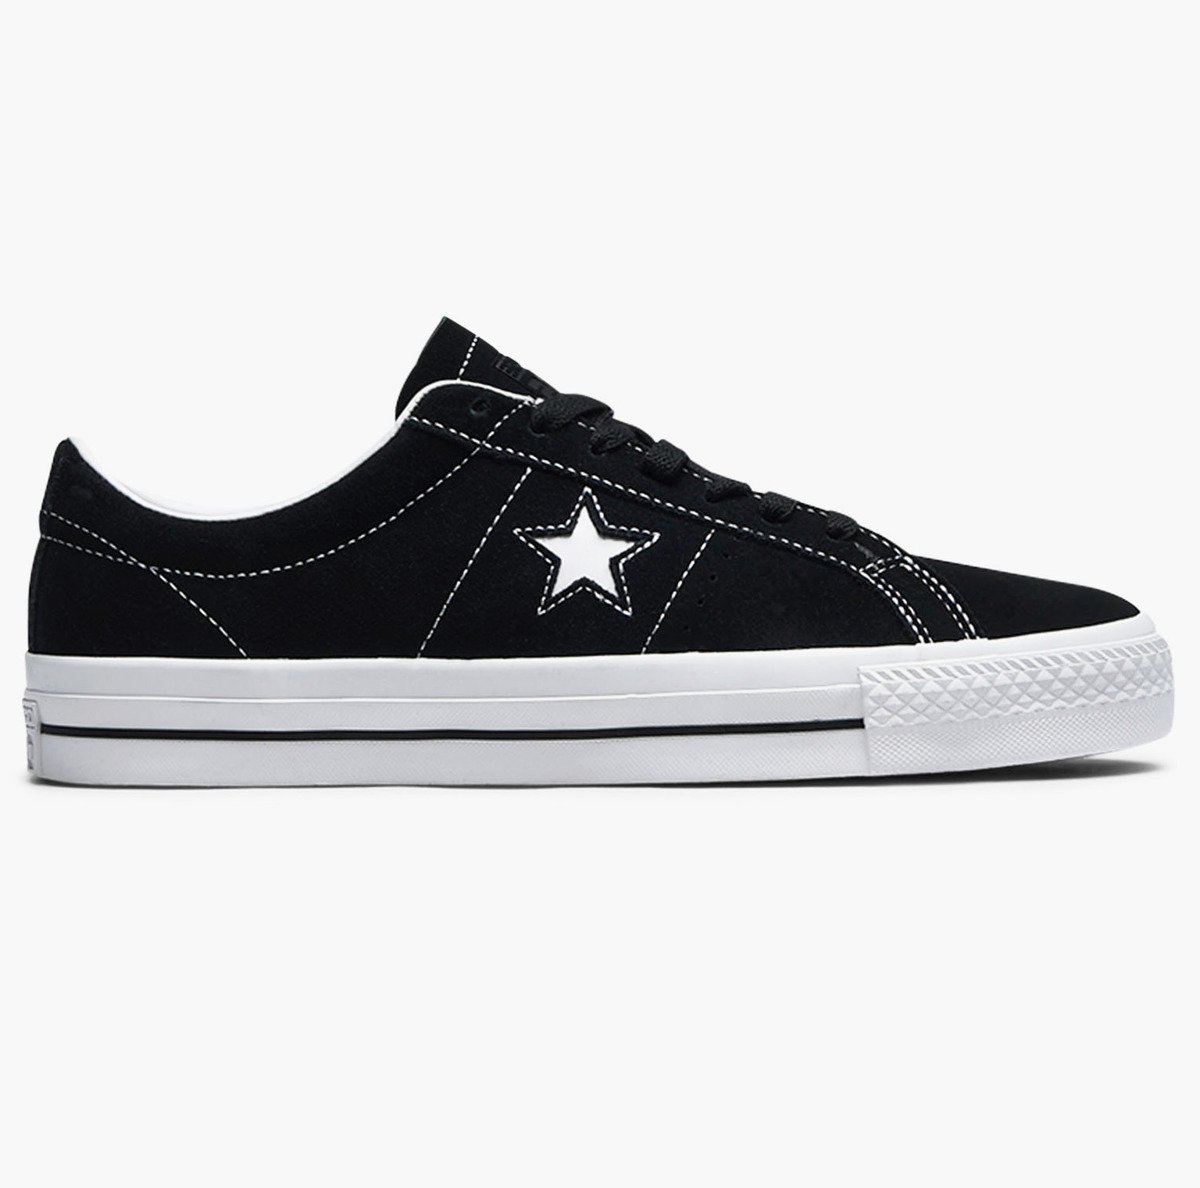 Converse One Star Pro Refinement Ox 